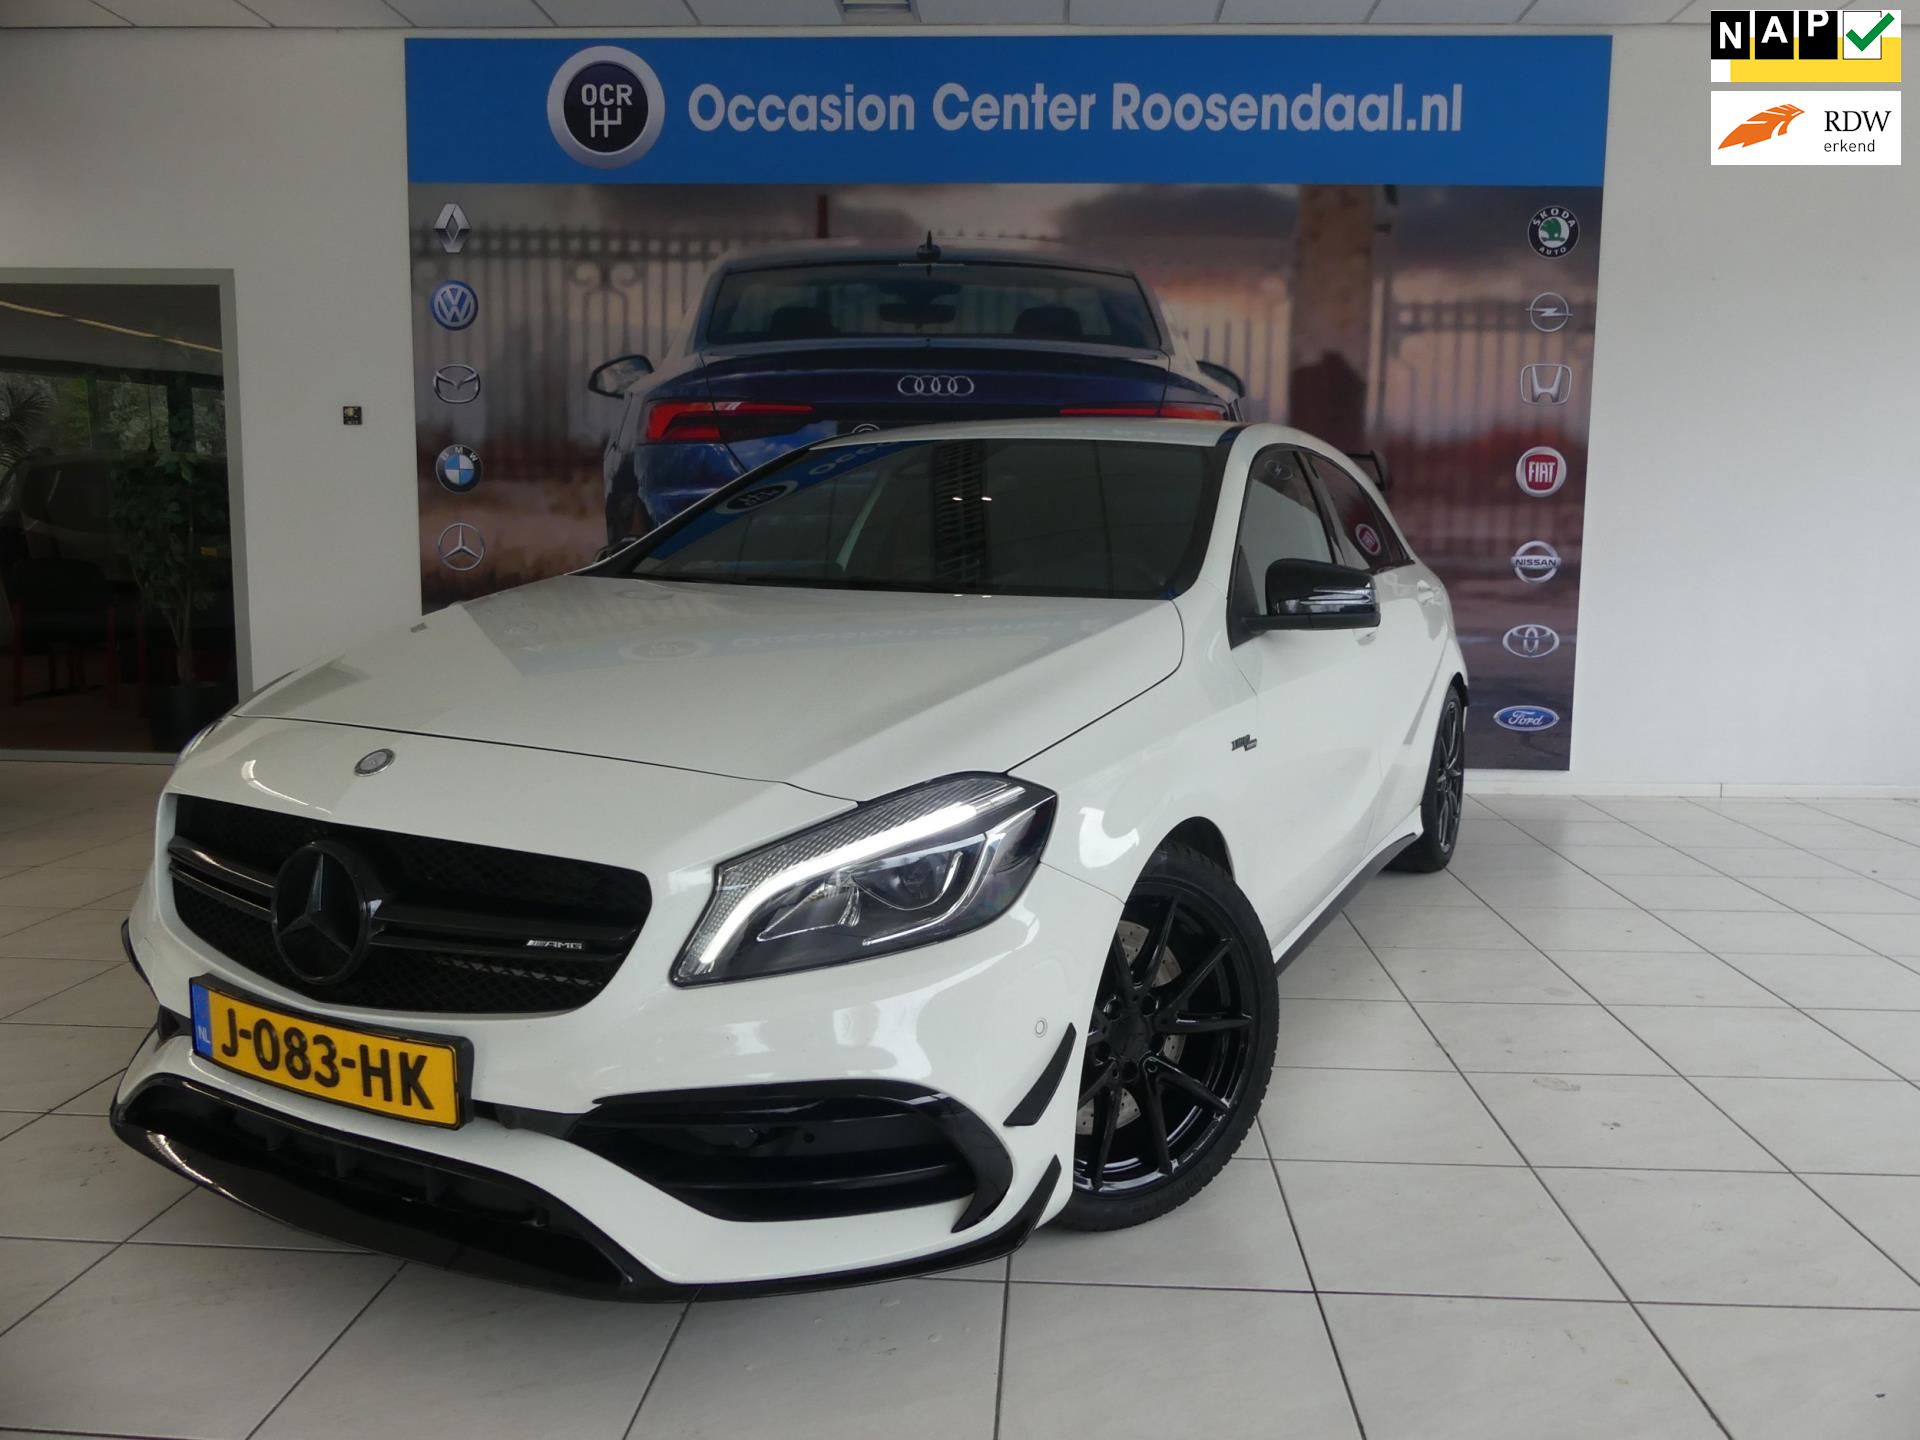 Mercedes-Benz A-klasse occasion - Occasion Center Roosendaal